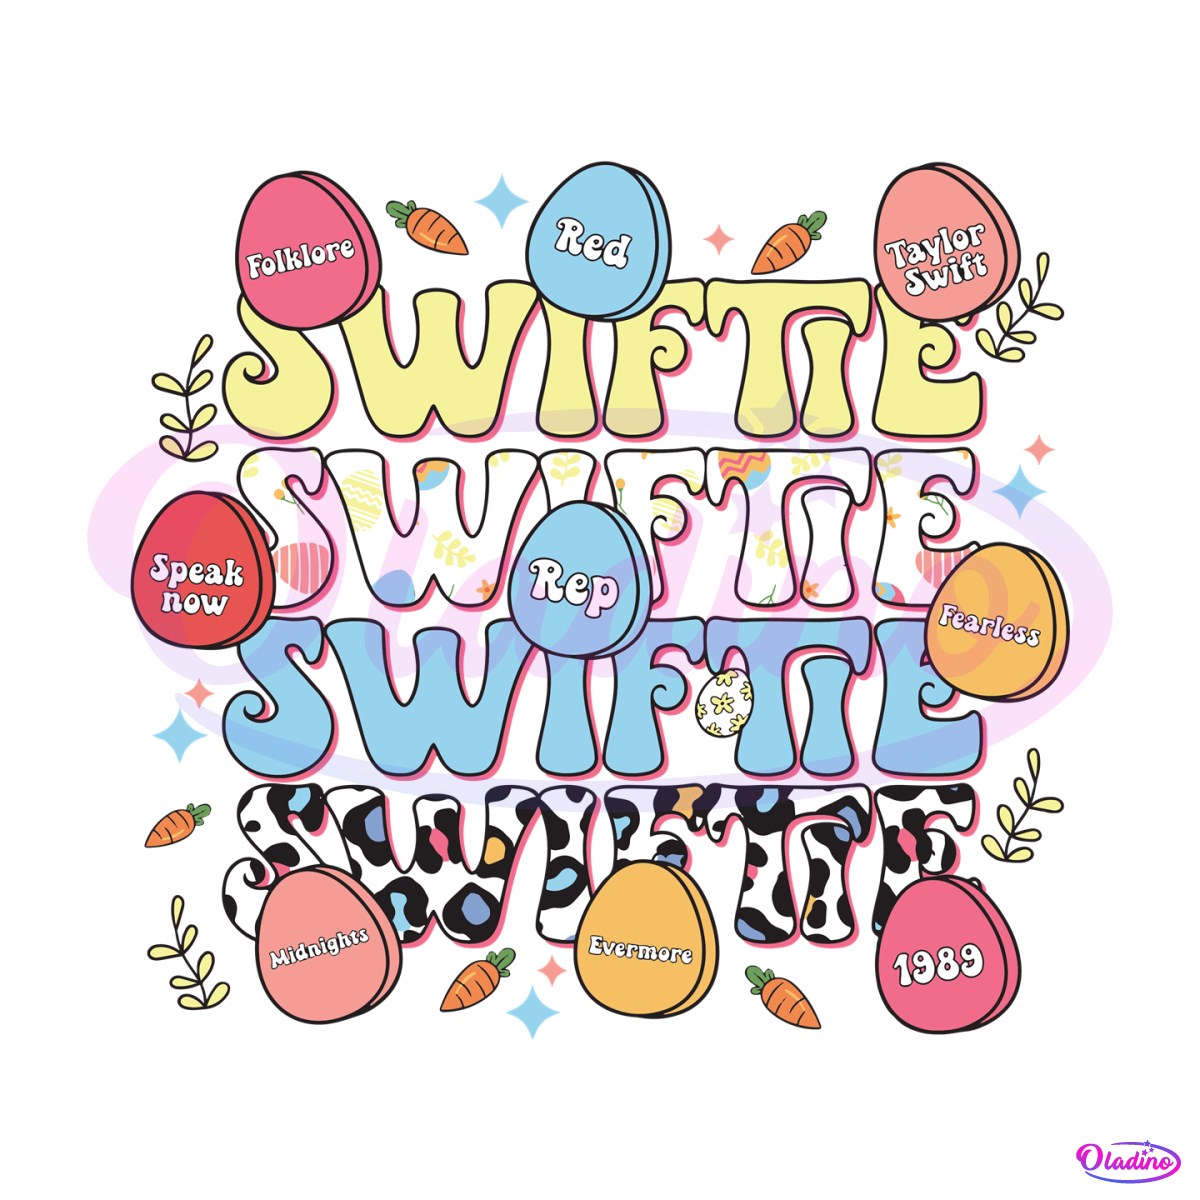 swiftie-easter-eggs-taylor-swift-albums-png